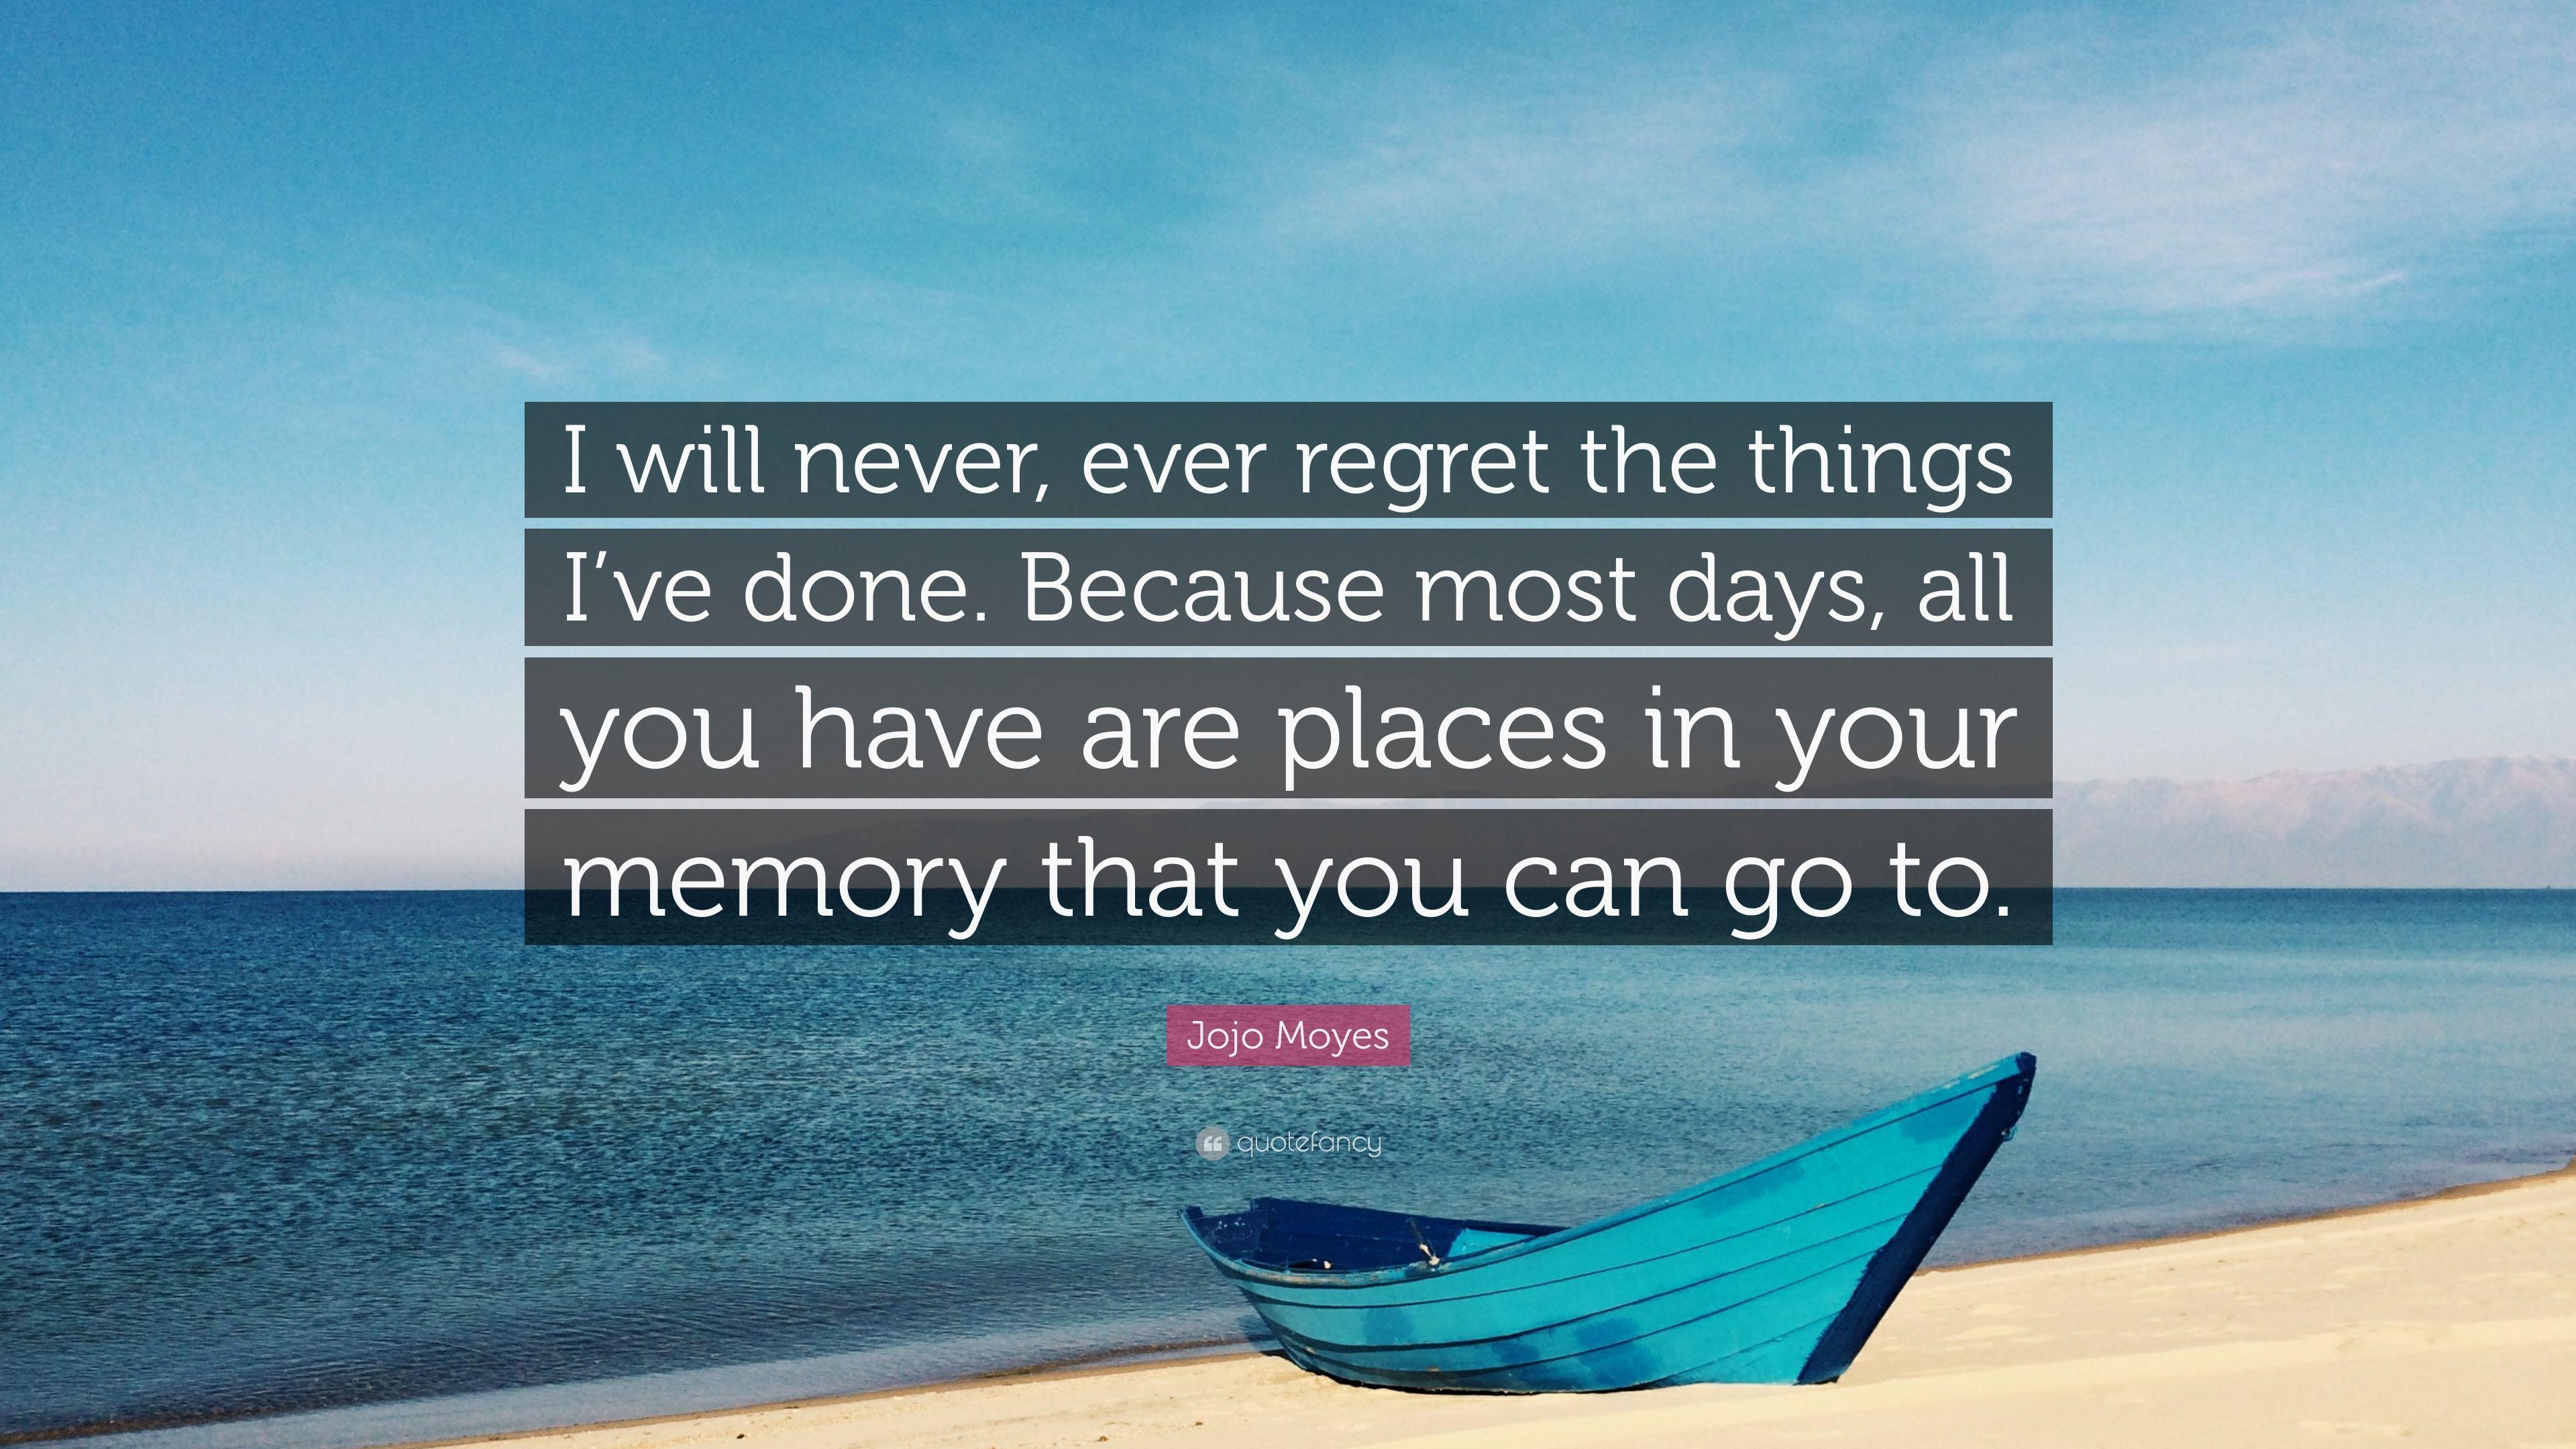 Jojo Moyes Quote: “I will never, ever regret the things I've done